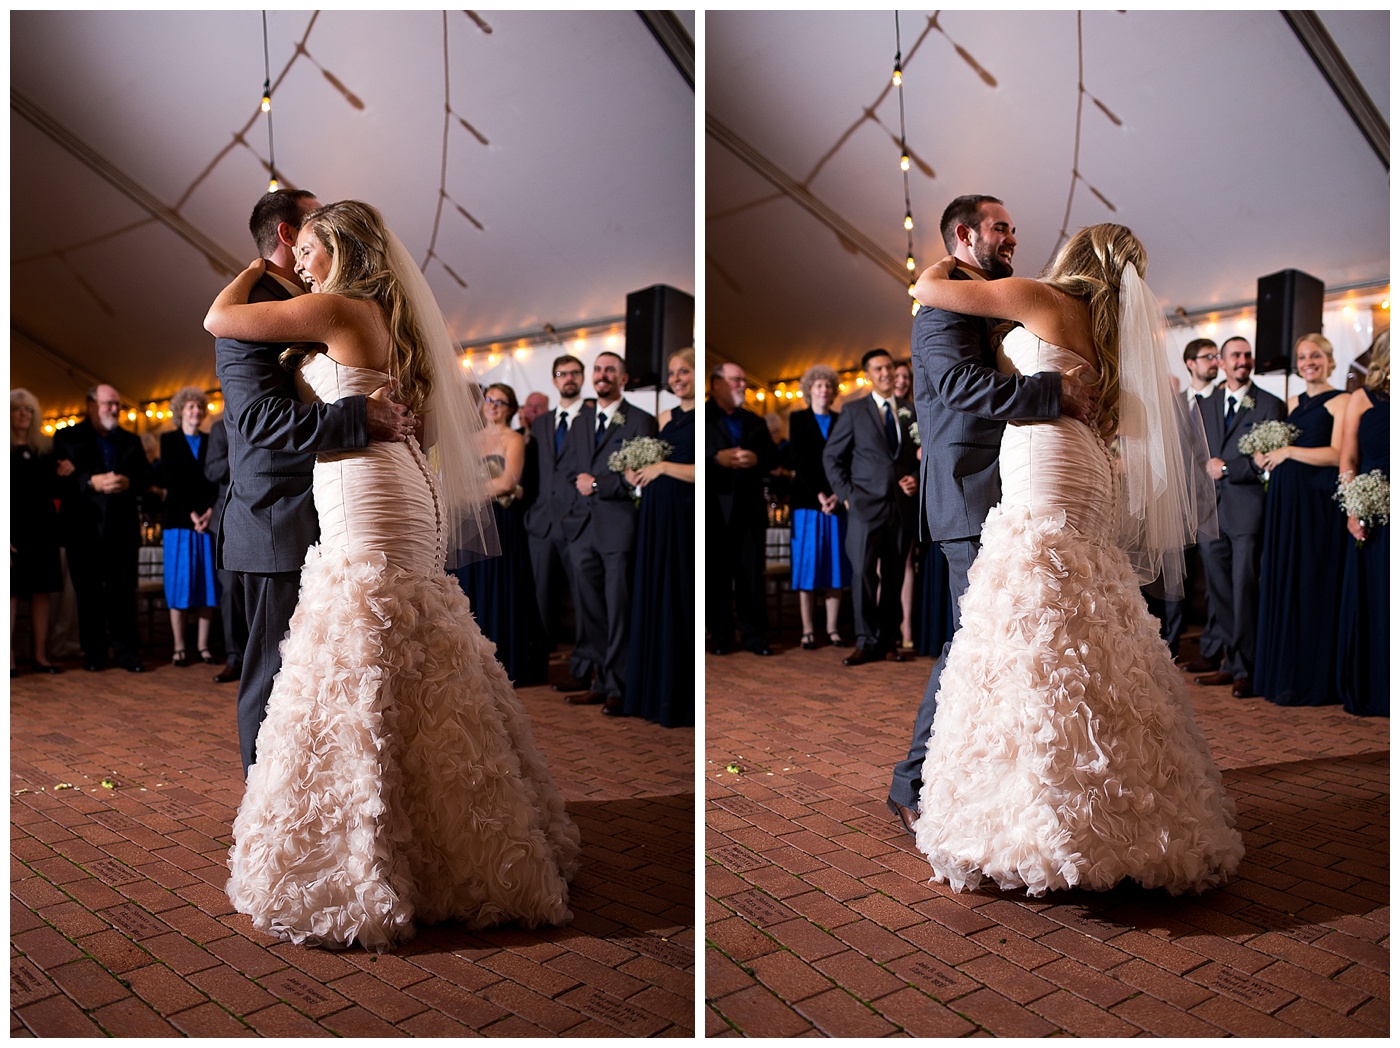 Erin & DJ are Married!!  A William and Mary Alumni House wedding in Williamsburg Virginia!